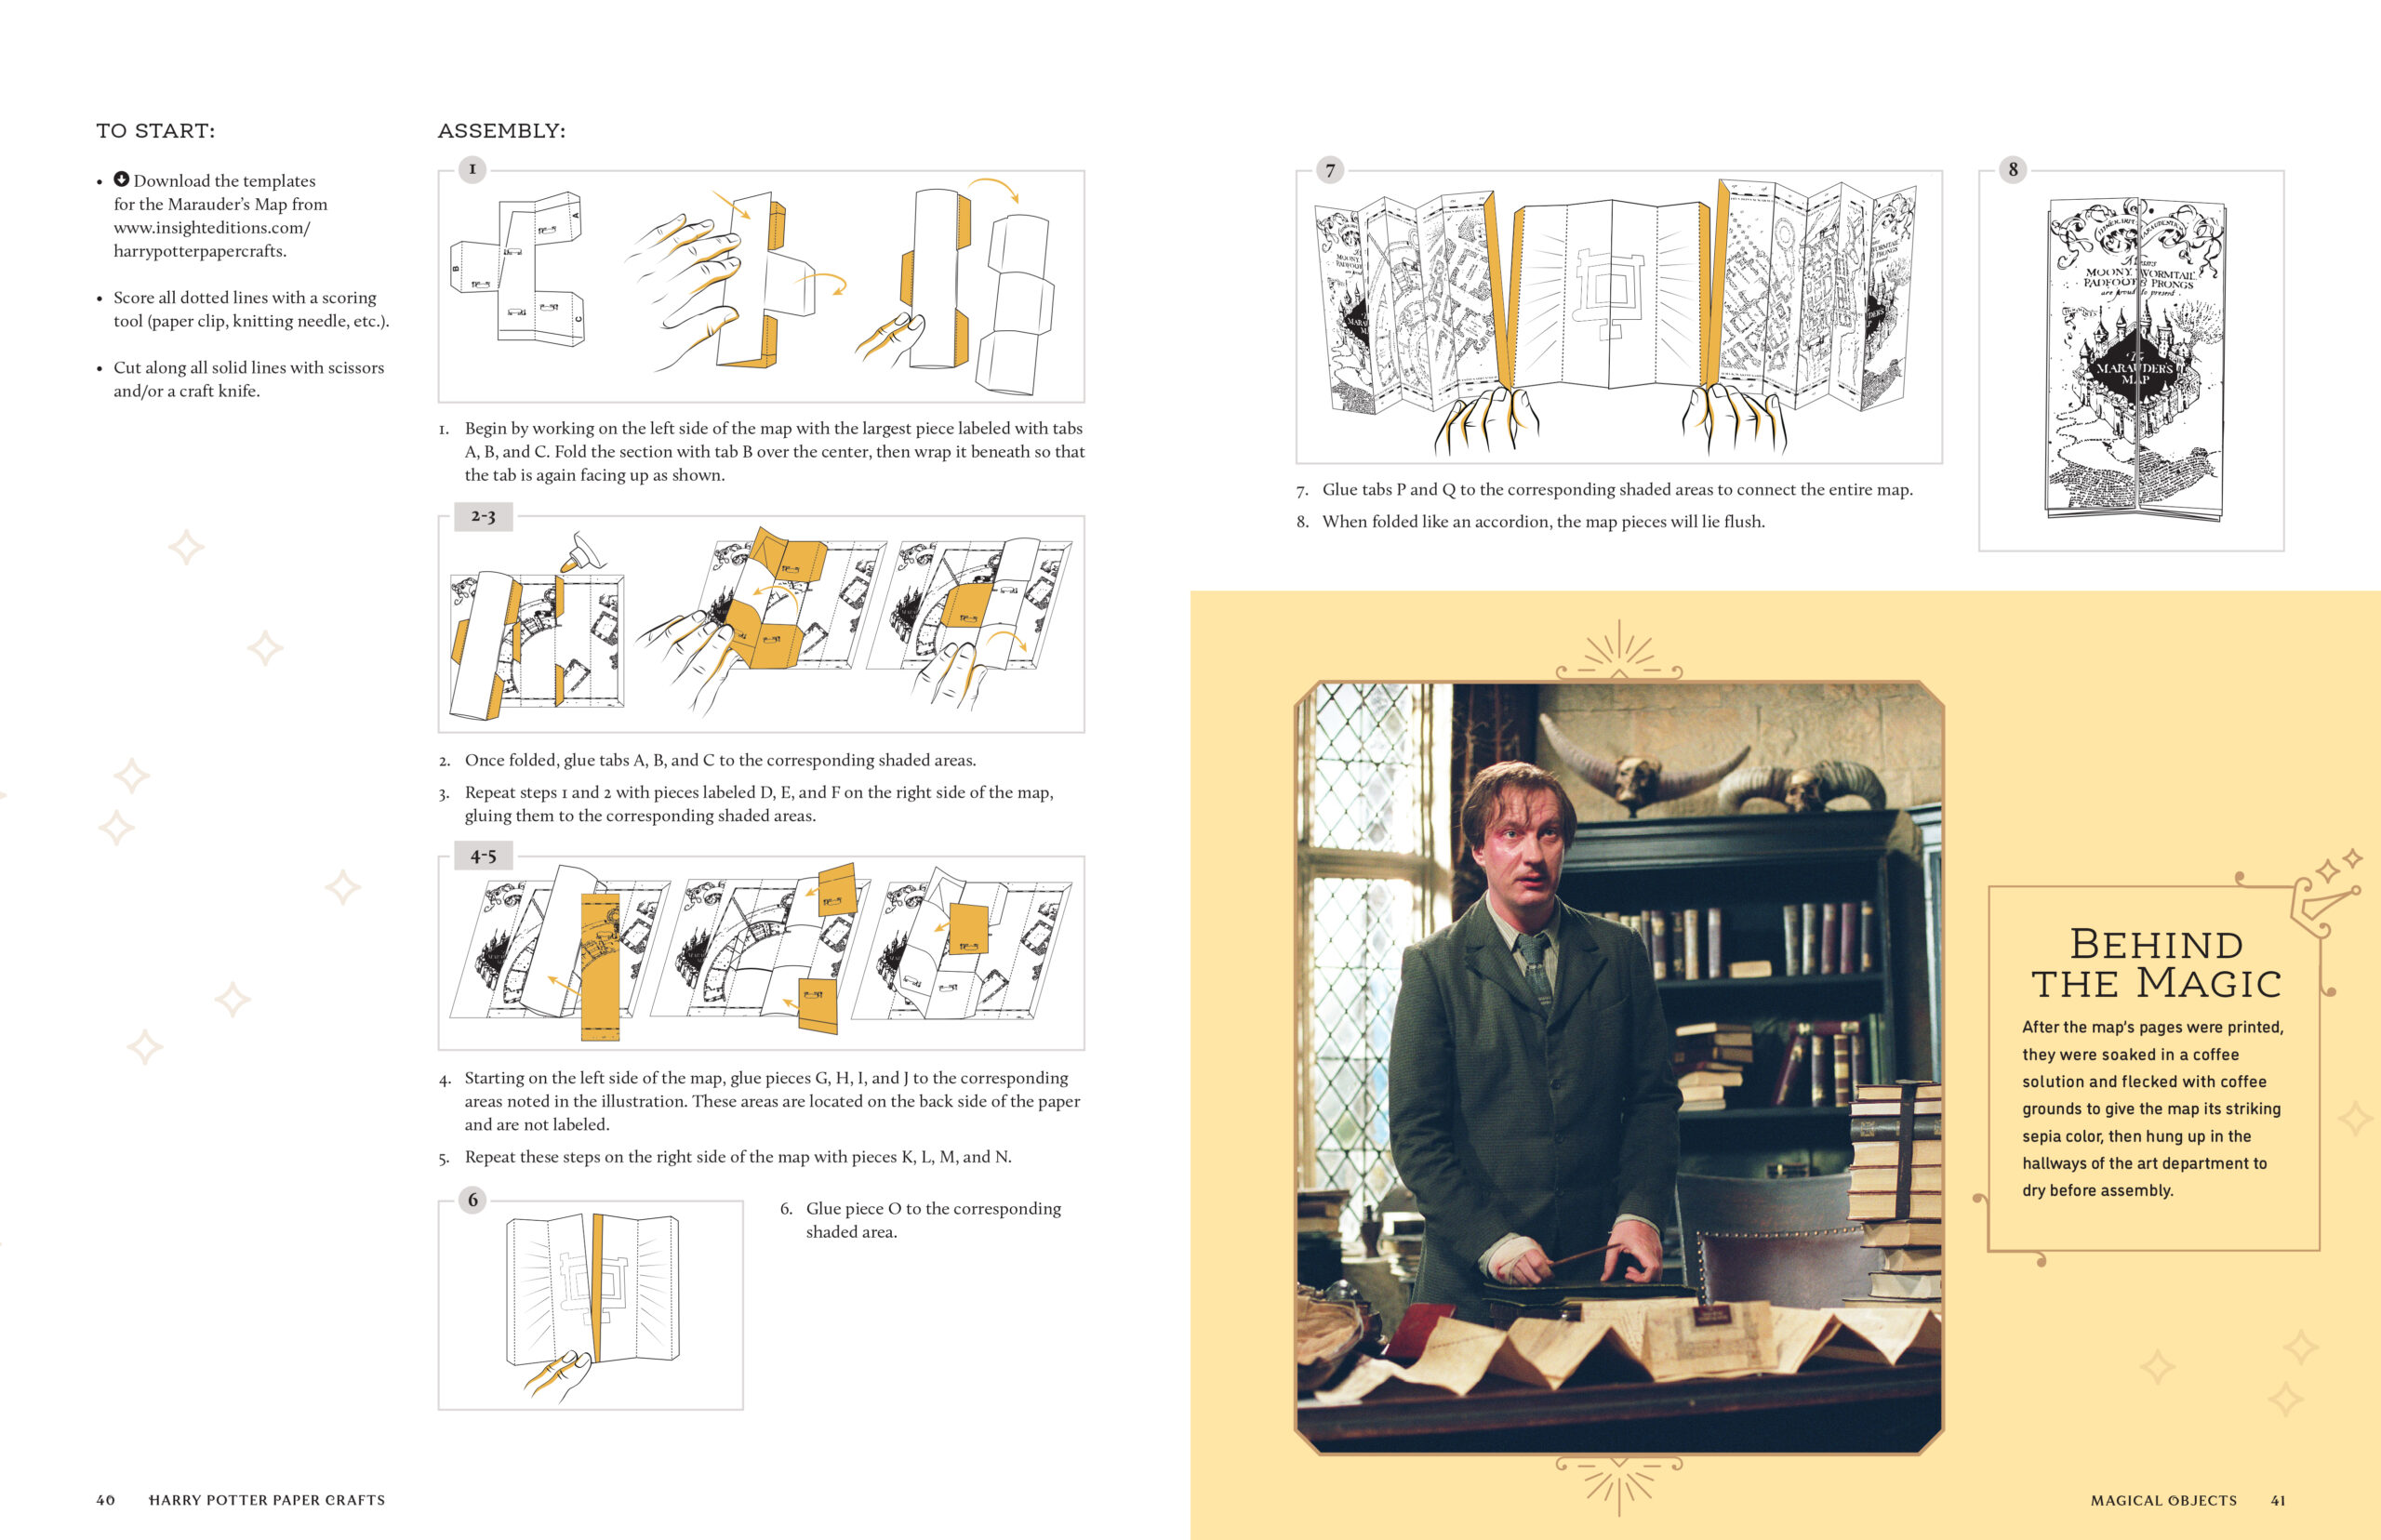 “Harry Potter: Magical Paper Crafts” features instructions for a Marauder’s Map craft.